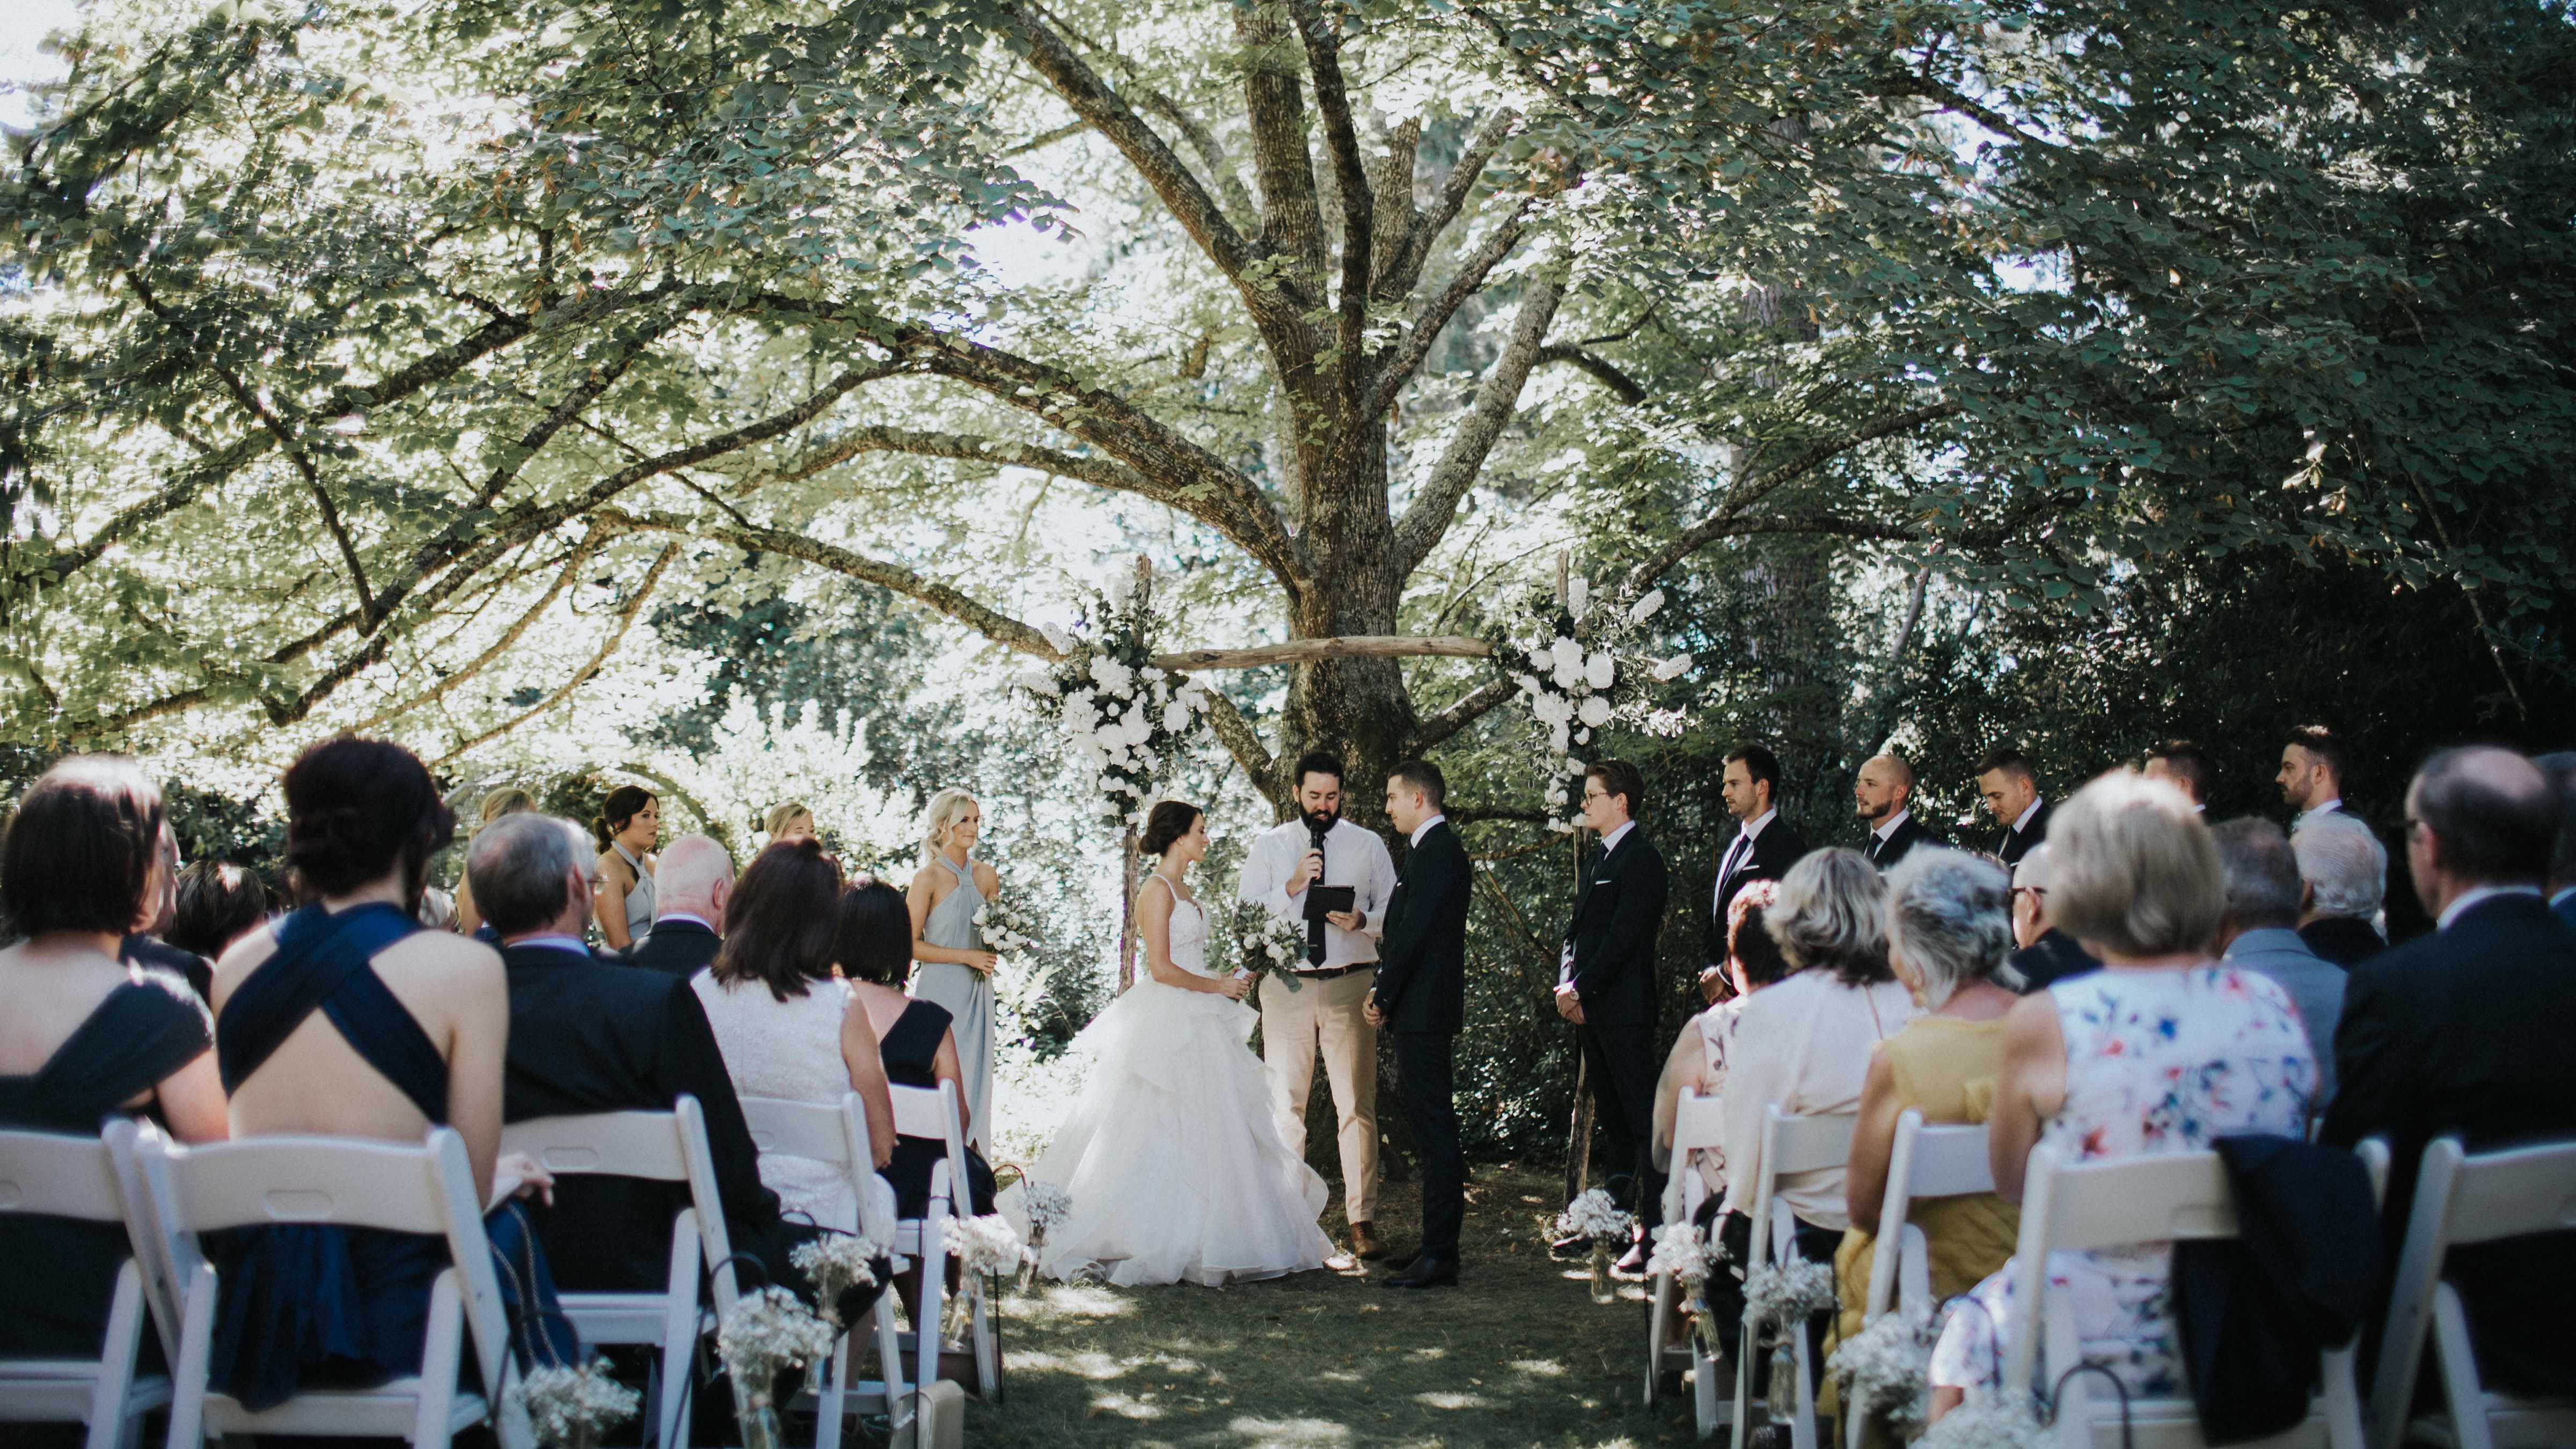 A wedding in full swing beneath the Linden Tree in the Heritage Gardens. A wooden arch adorned with flowers stands behind the bride, groom, and celebrant. Guests are seated on white chairs on either side of the aisle. Photo: Cassie Sullivan.